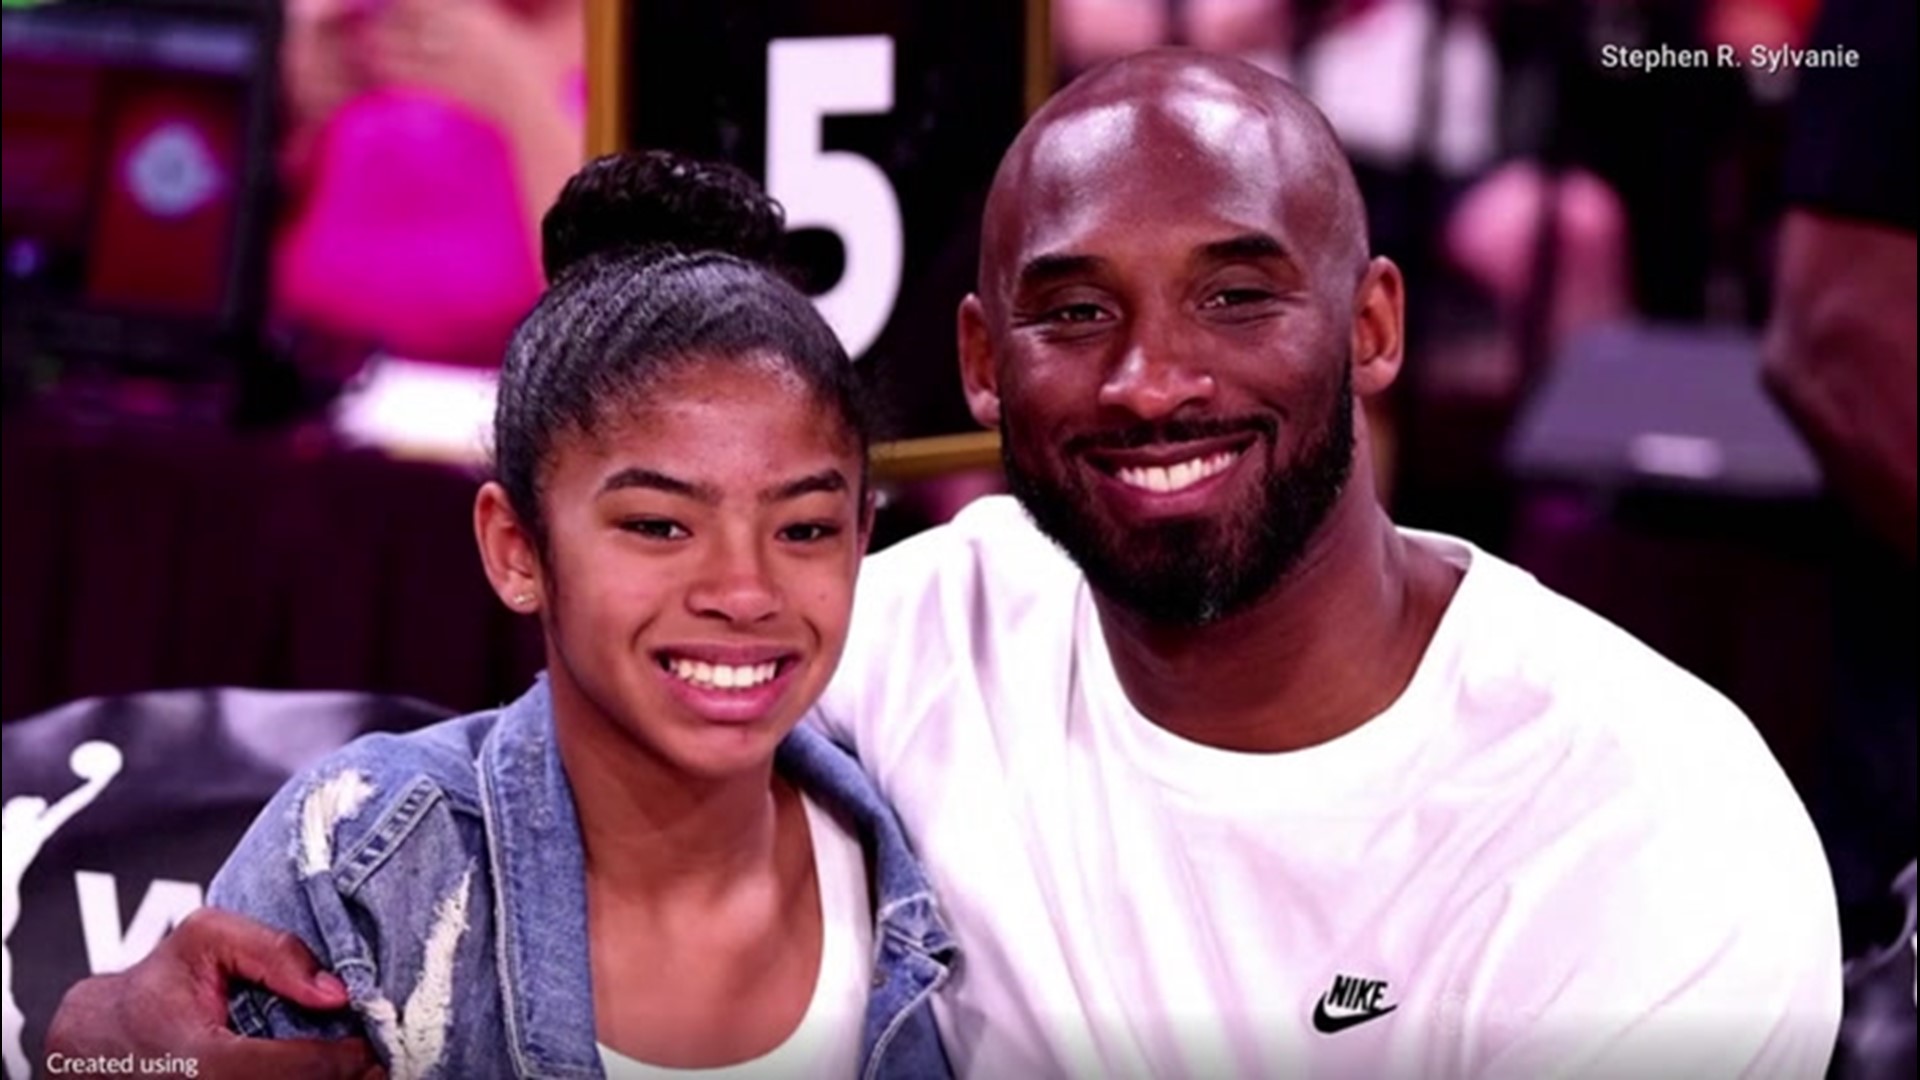 The basketball world mourns the death of Kobe Bryant who was killed on Jan. 26, in a helicopter crash in Calabasas, California, along with his daughter Gianna.